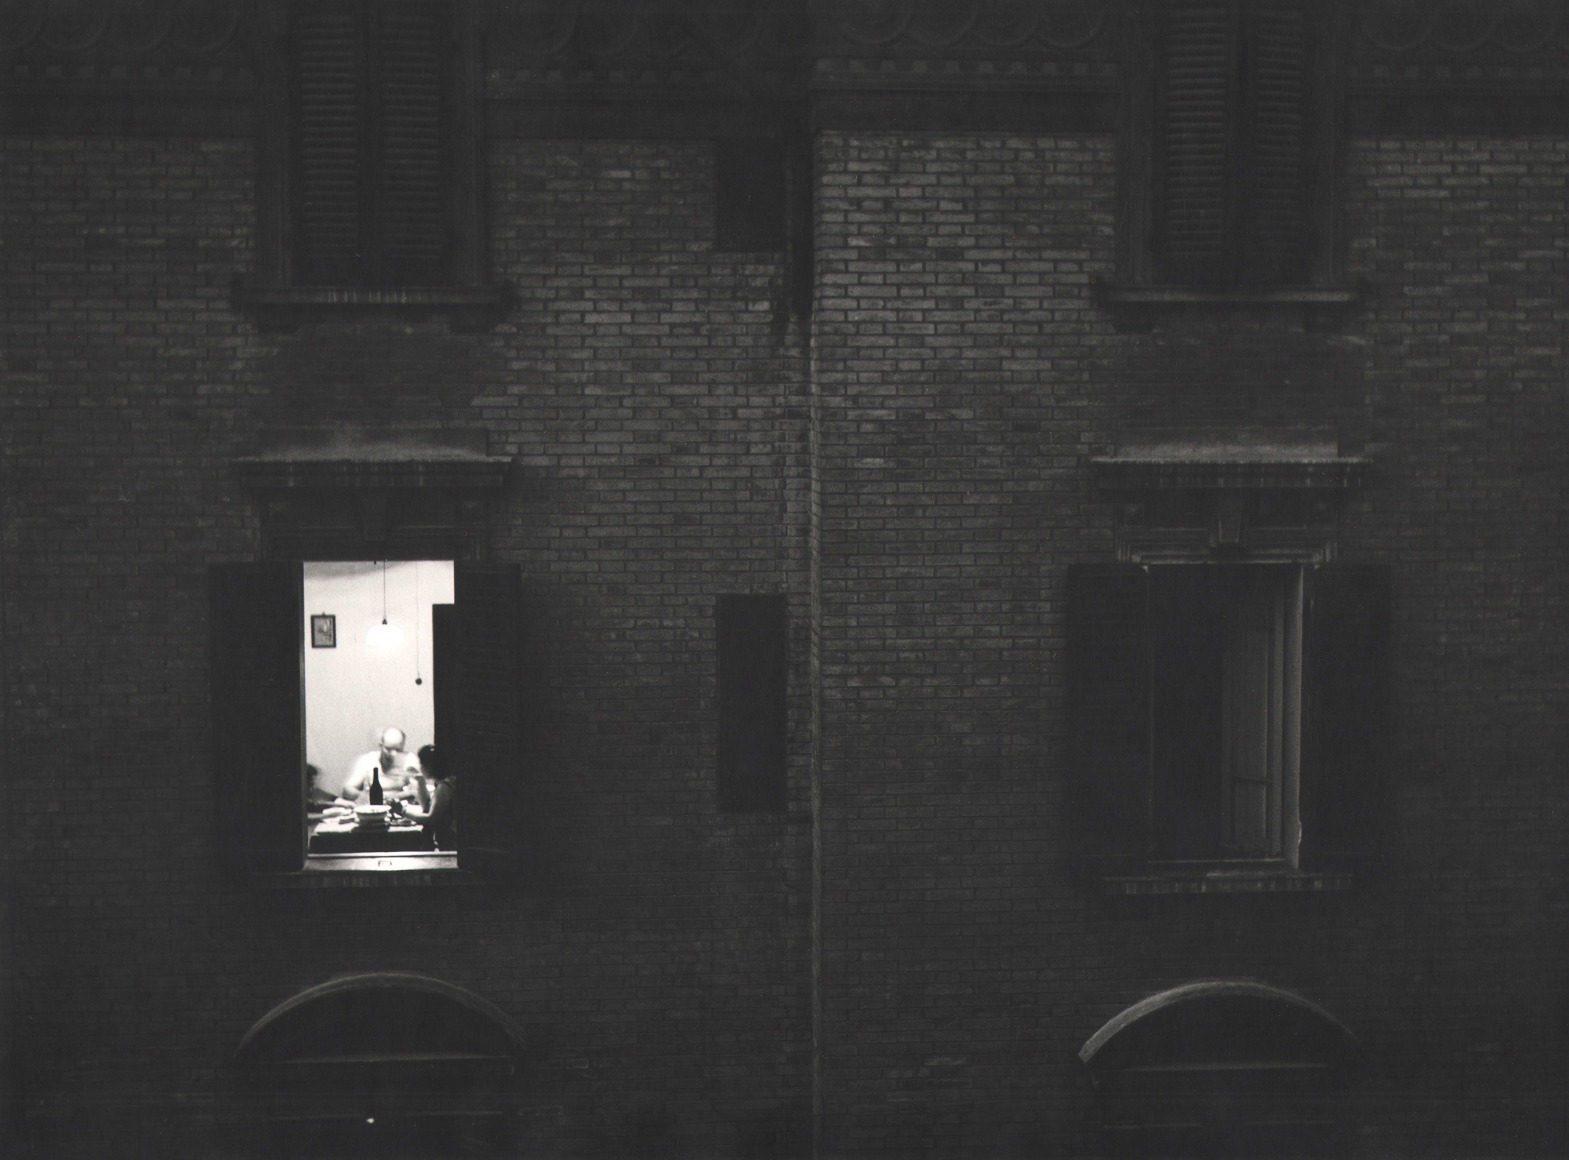 Nino Migliori, Gente dell'Emilia, 1953. Exterior view of an apartment building. One window is lit and a family is seated at the dinner table.